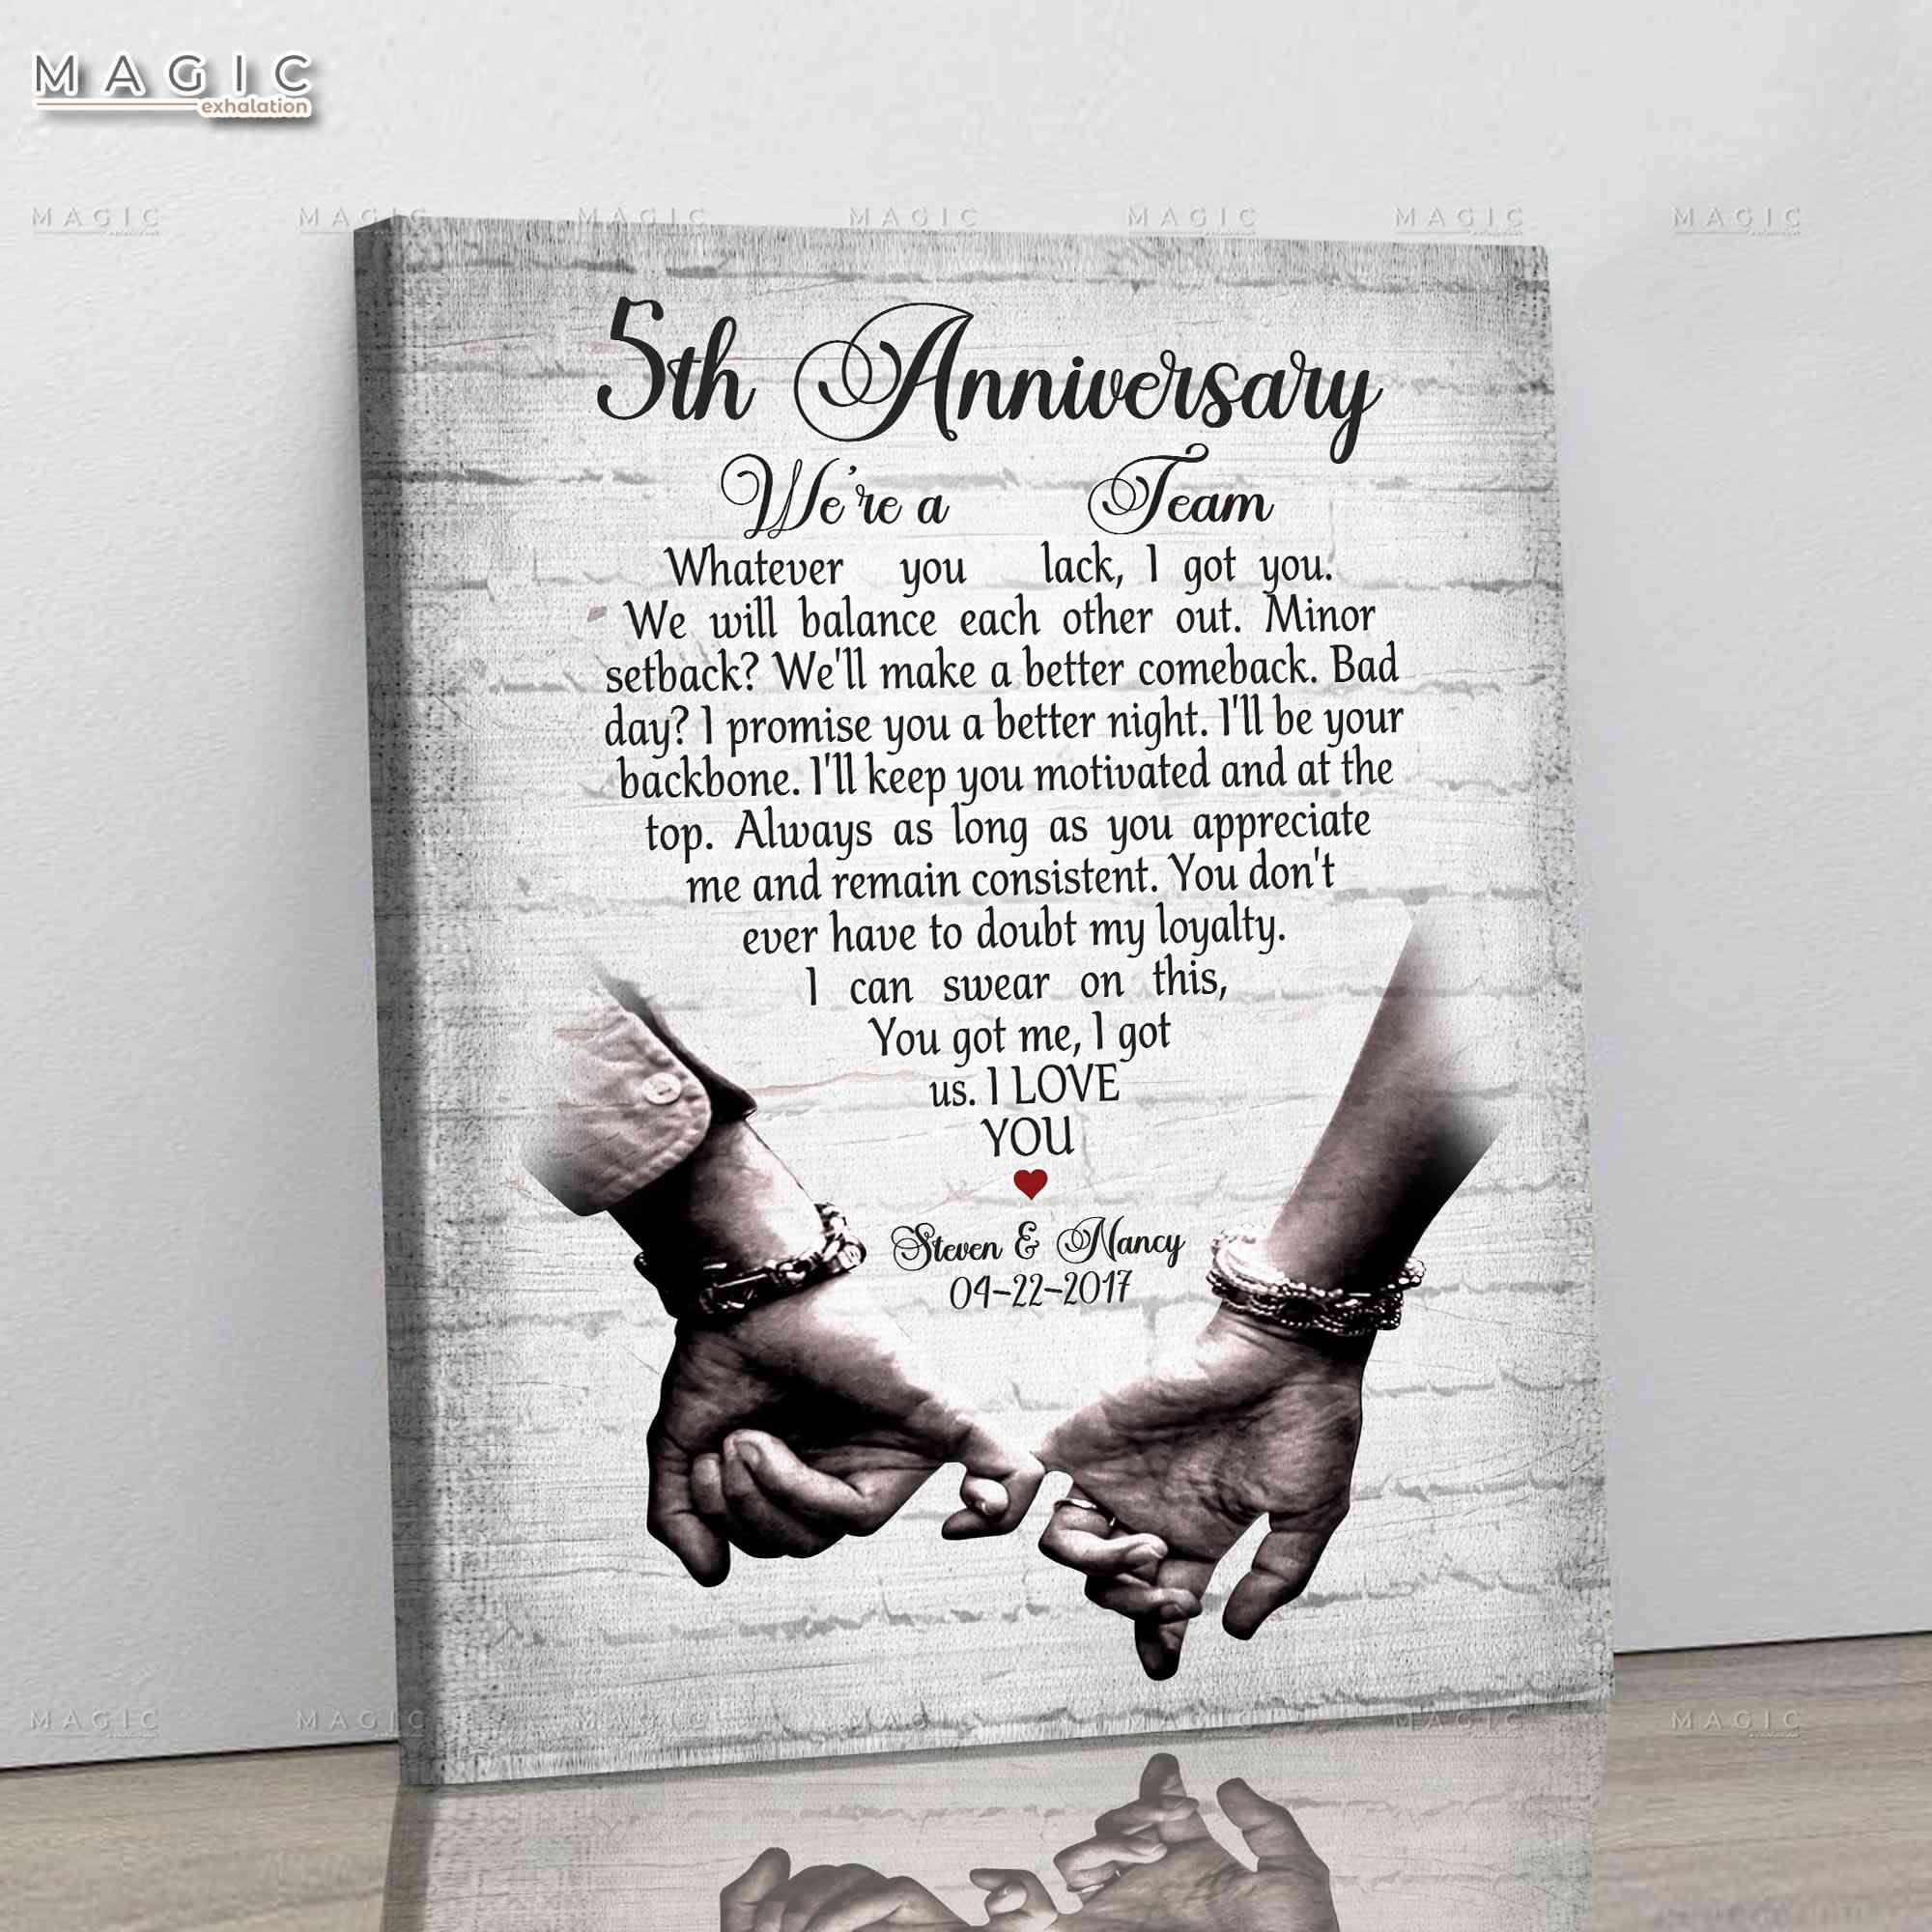 5th anniversary wedding gift, gifts for 5 year wedding anniversary